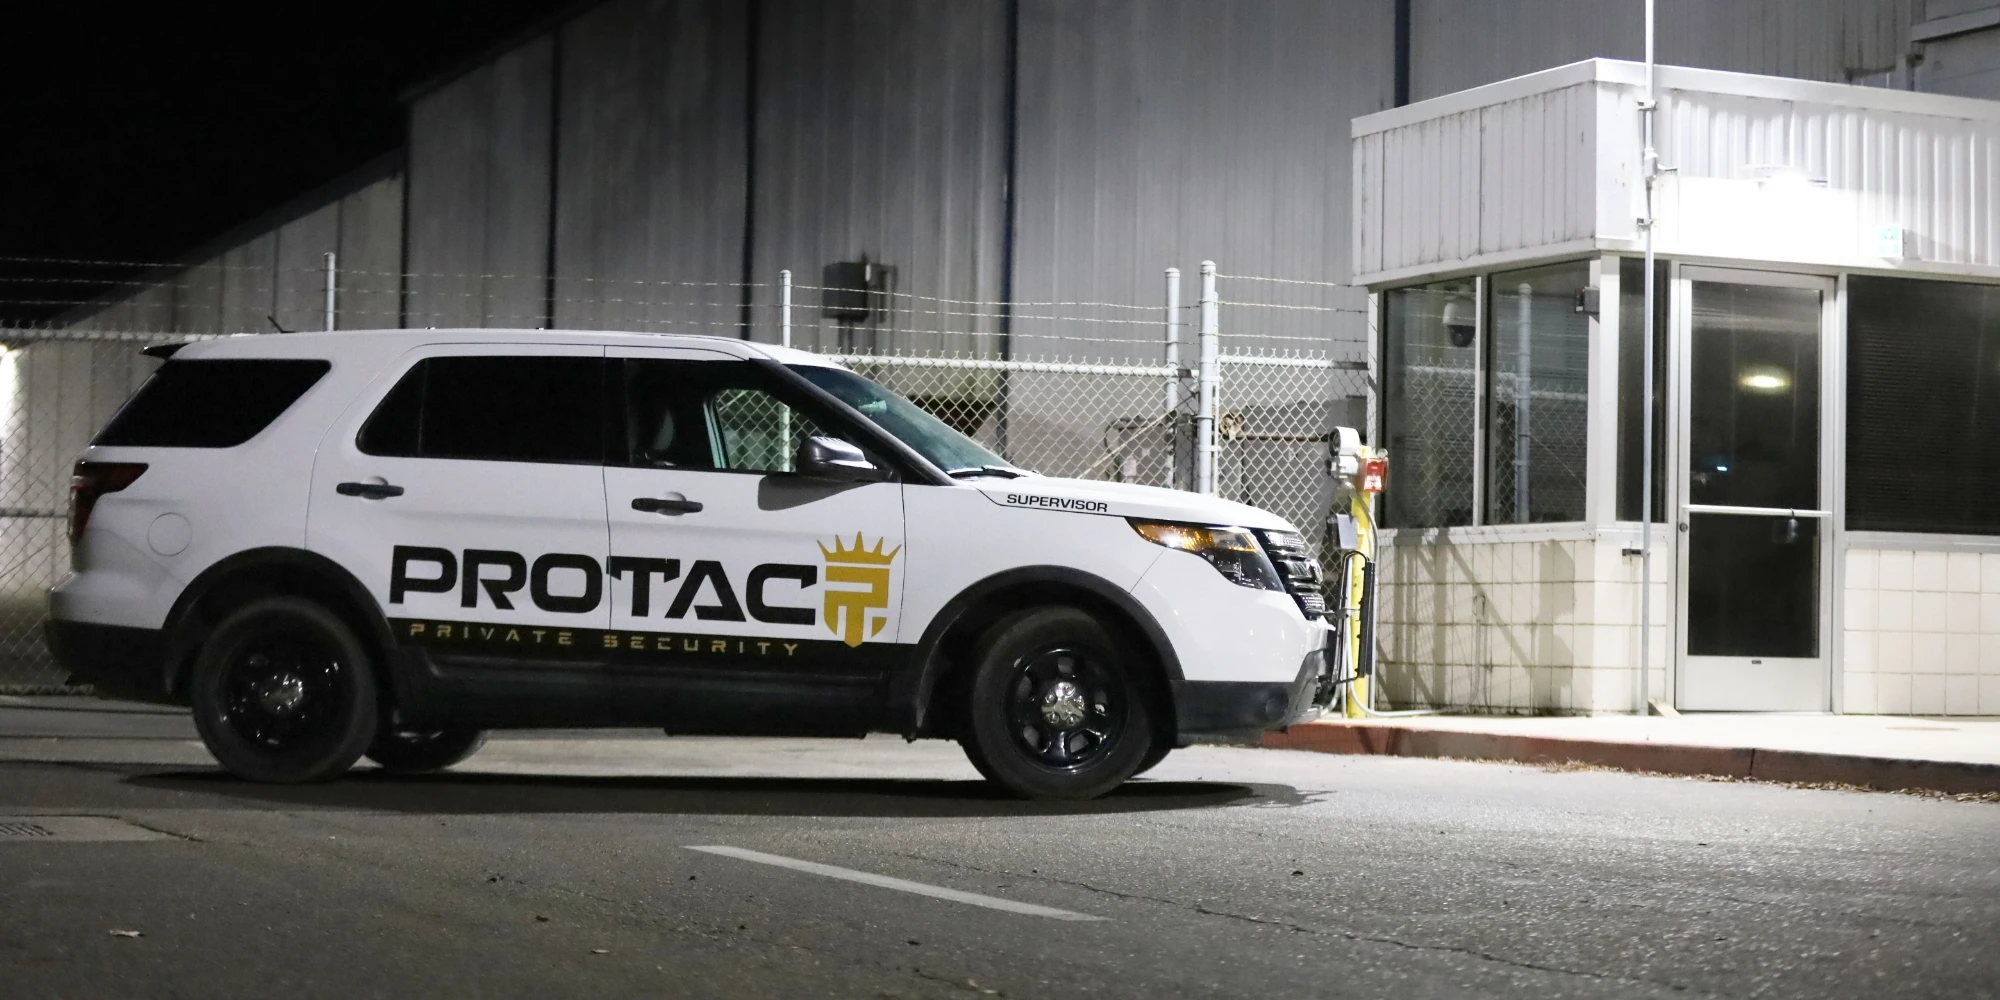 protac security car in front of industrial building at night